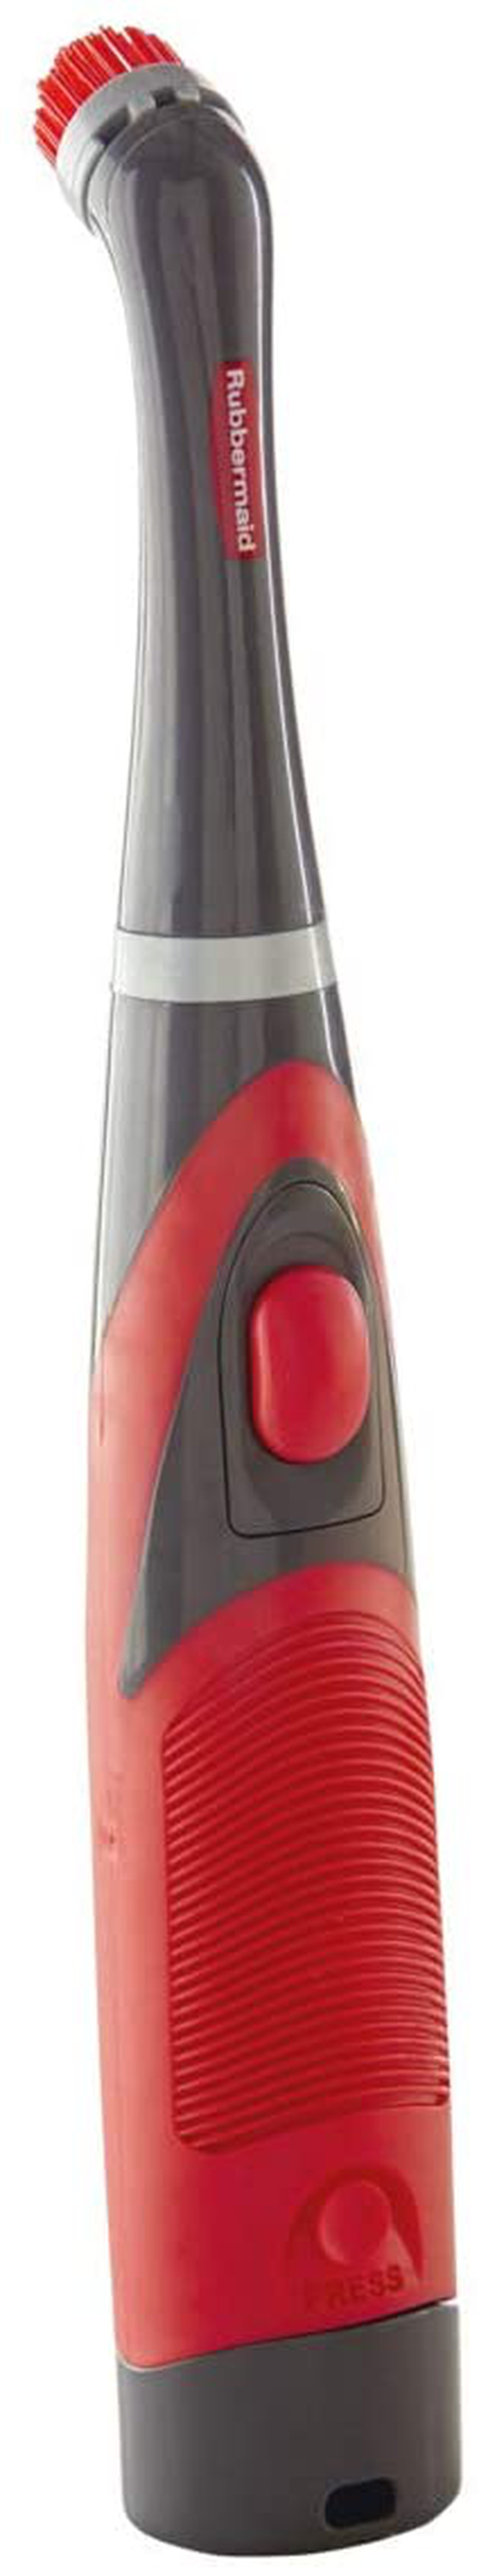 Rubbermaid Cleaning Power Scrubber Brush Polish Detail Kit, 8 Pieces, Red and Gray